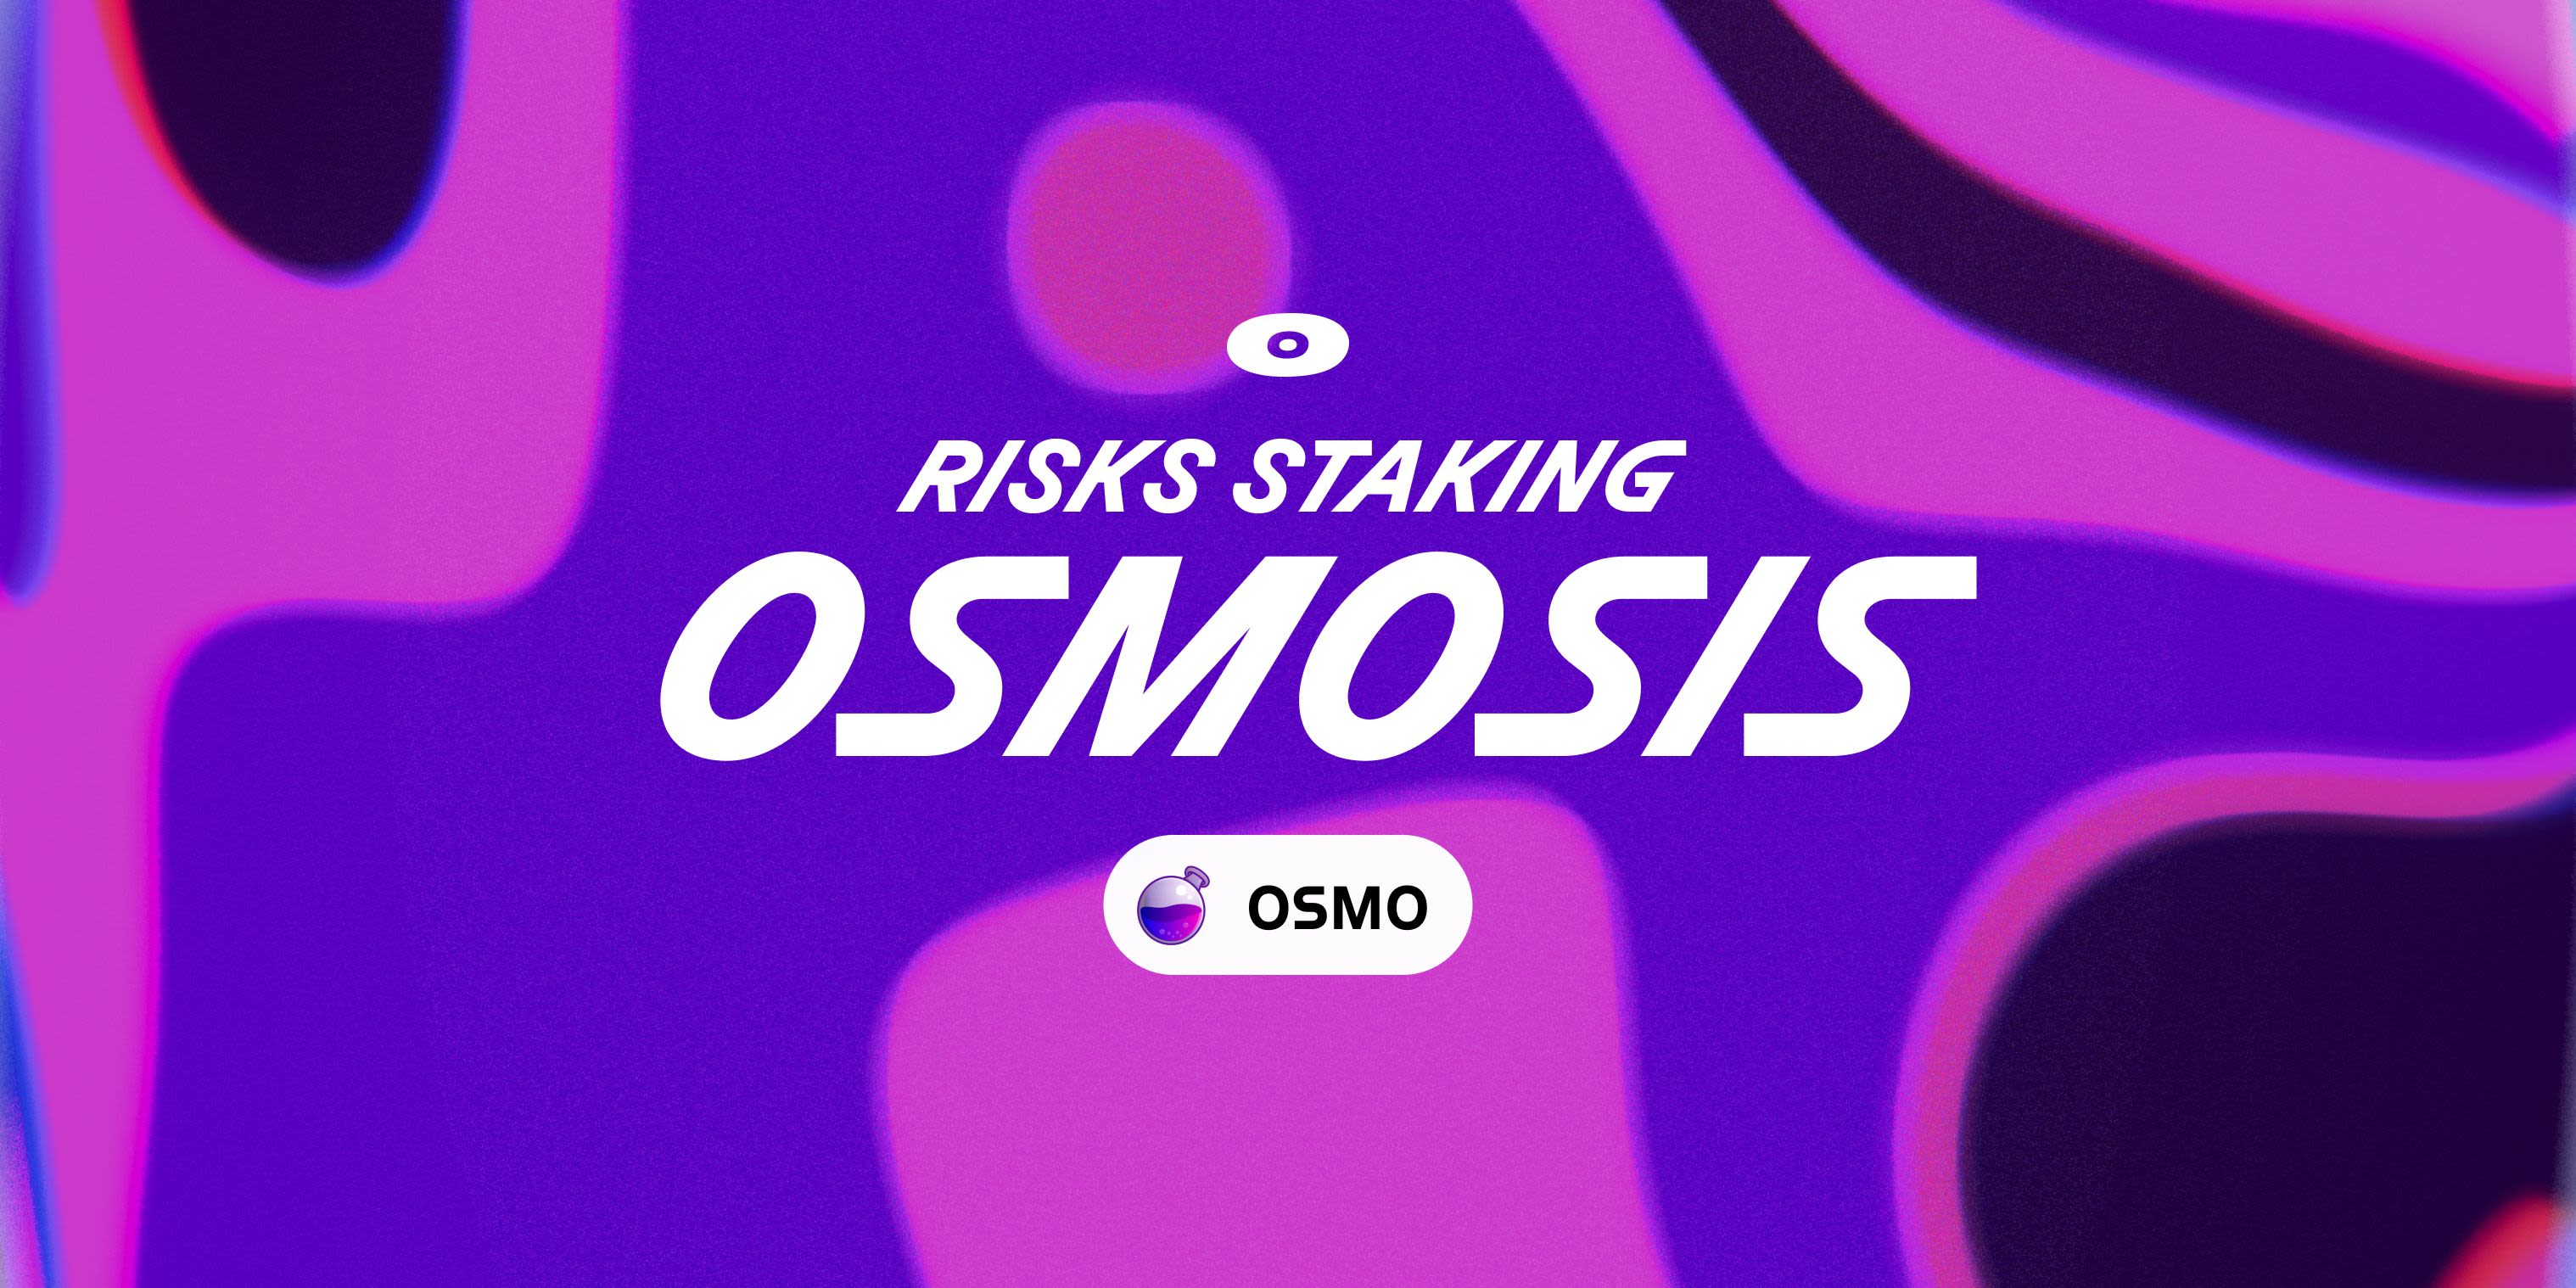 Cover Image for Risks of staking OSMO